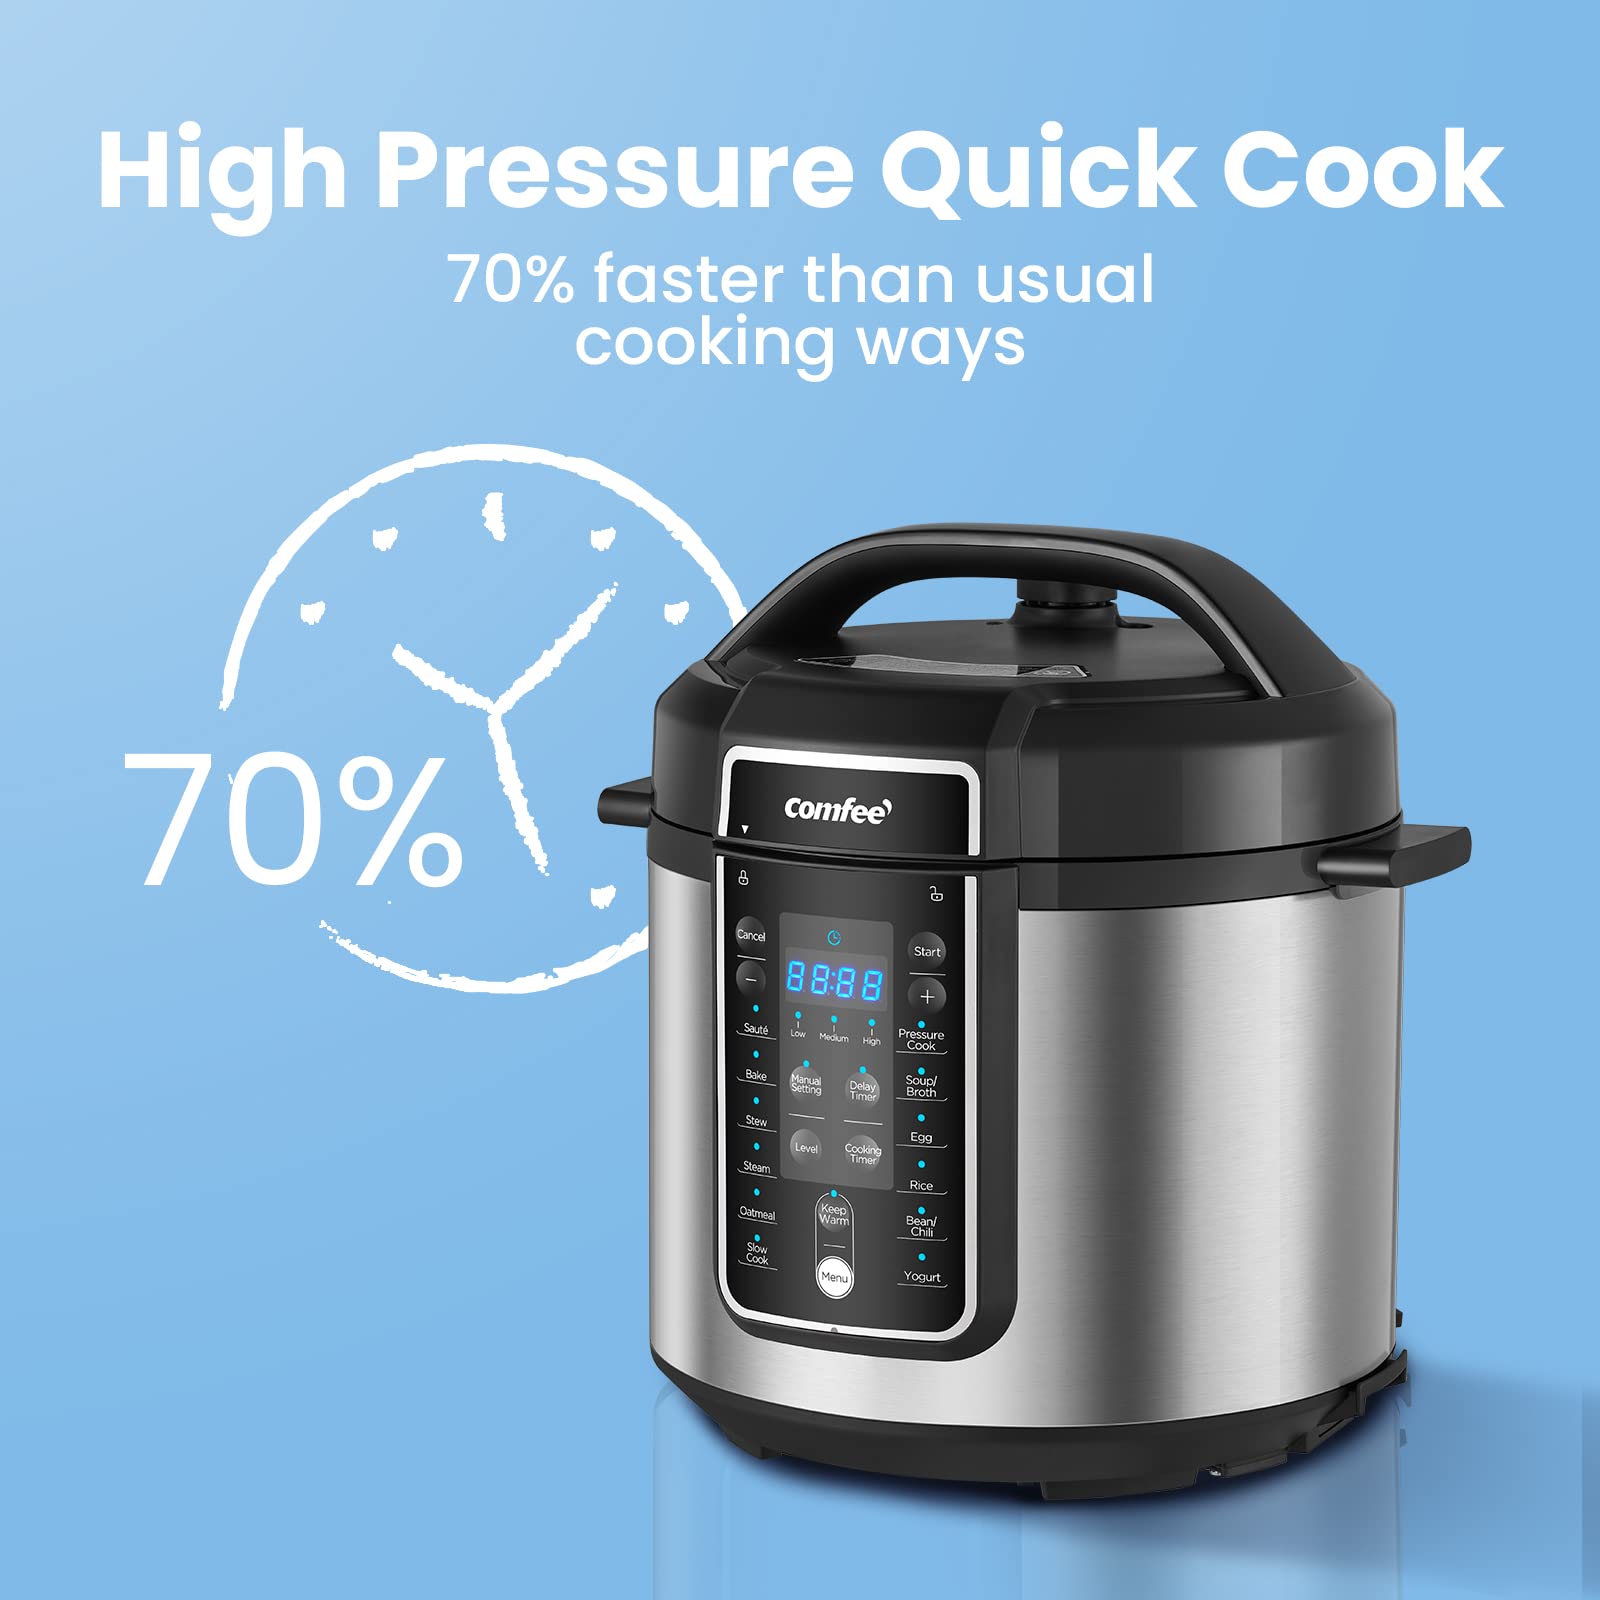 COMFEE’ Pressure Cooker 6 Quart with 12 Presets, Multi-Functional Programmable Slow Cooker, Rice Cooker, Steamer, Sauté pan, Egg Cooker, Warmer and More